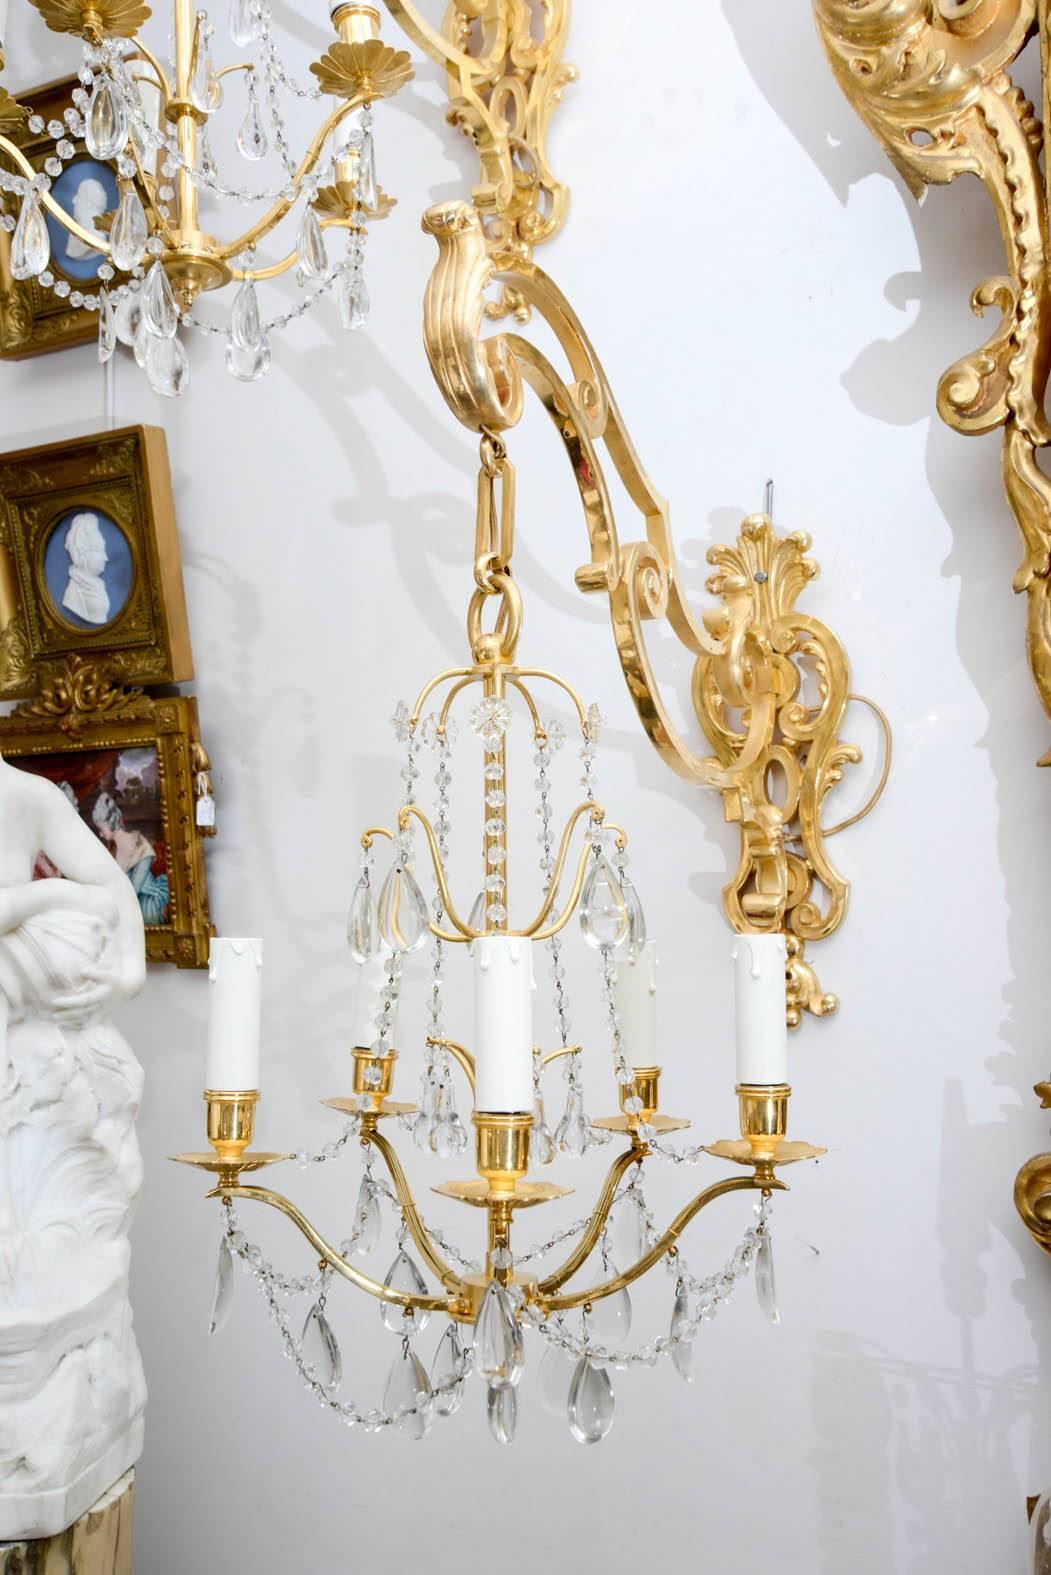 Two pairs of very rare and spectacular sconces, one arm of gilded bronze holding a chandelier in crystal and bronze, five lights.